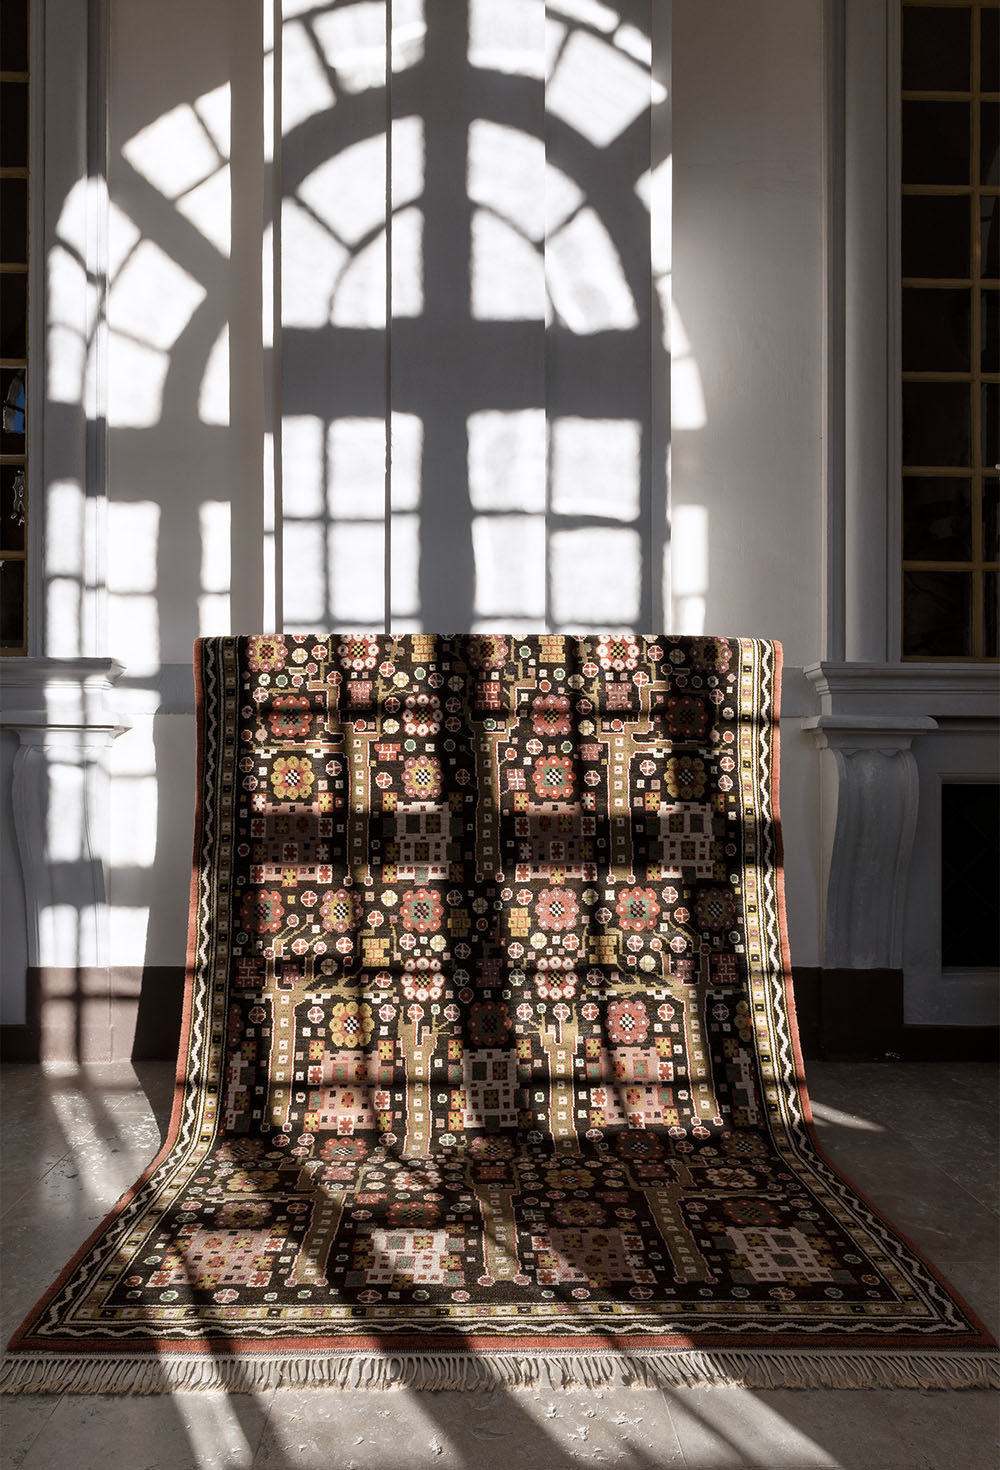 Svarta Trädgårdsmattan, designed in 1923, is often referred to as one of MååsFjetterström’s masterpieces. The design was inspired by the ancient oaks in her childhood garden, but also has clear influences from traditional Persian carpets